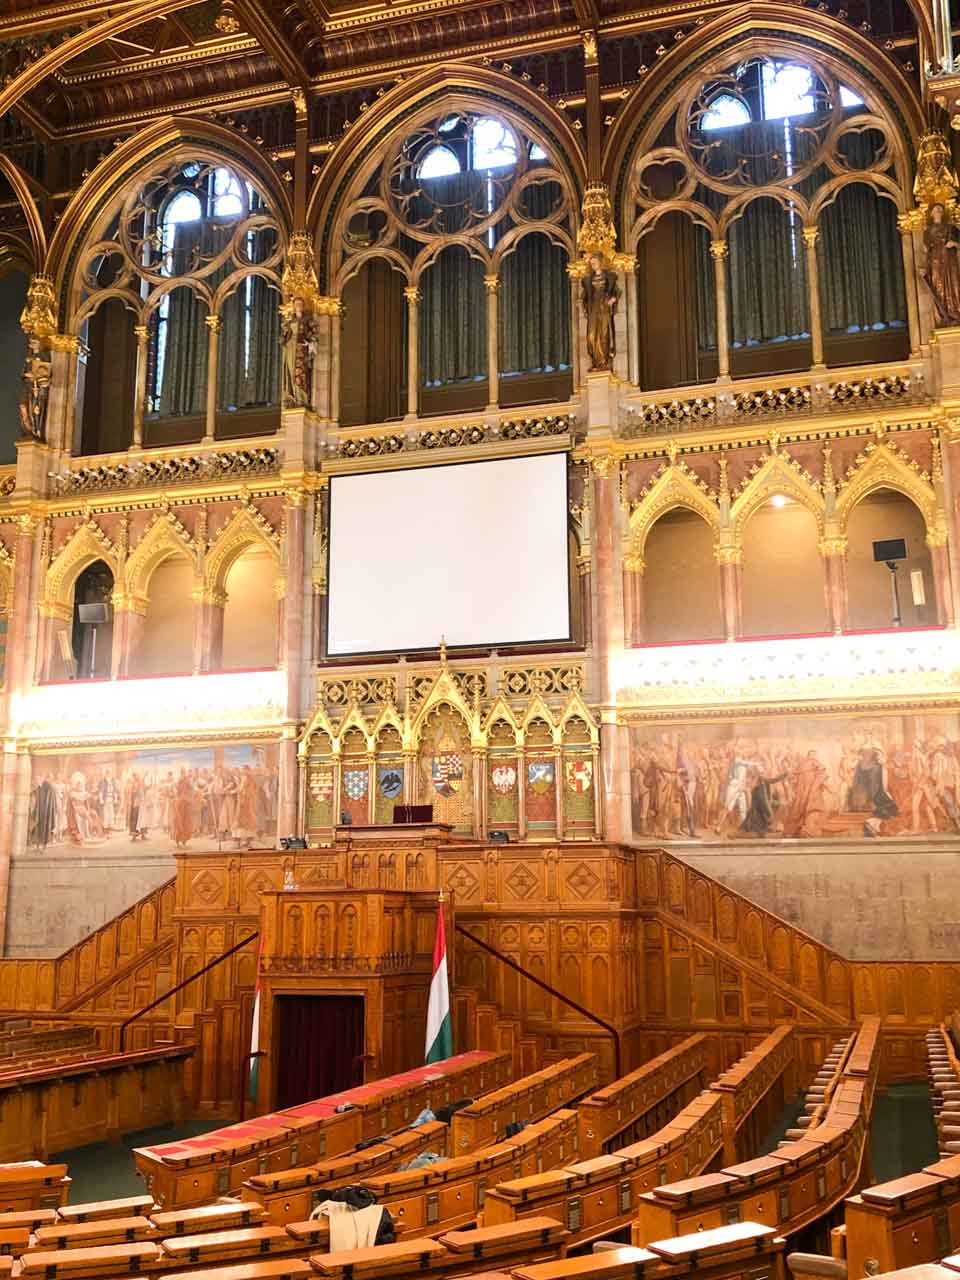 The former Chamber of Peers inside the Hungarian Parliament building